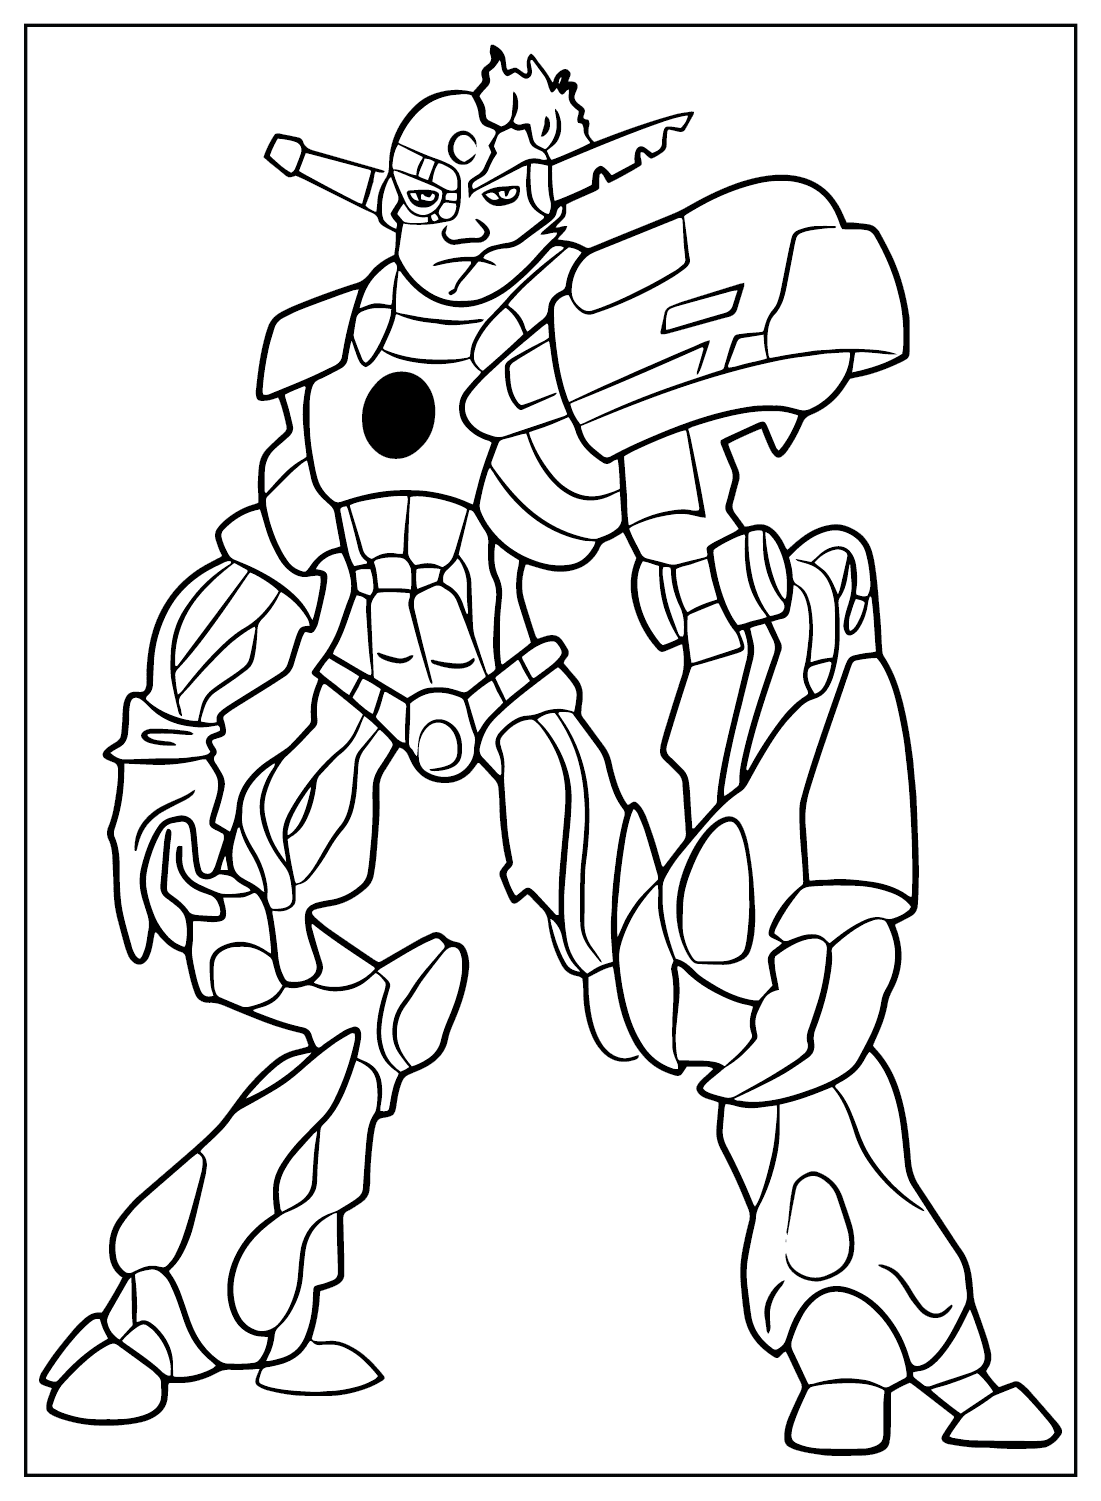 Erol from Jak and Daxter Coloring Page from Jak and Daxter